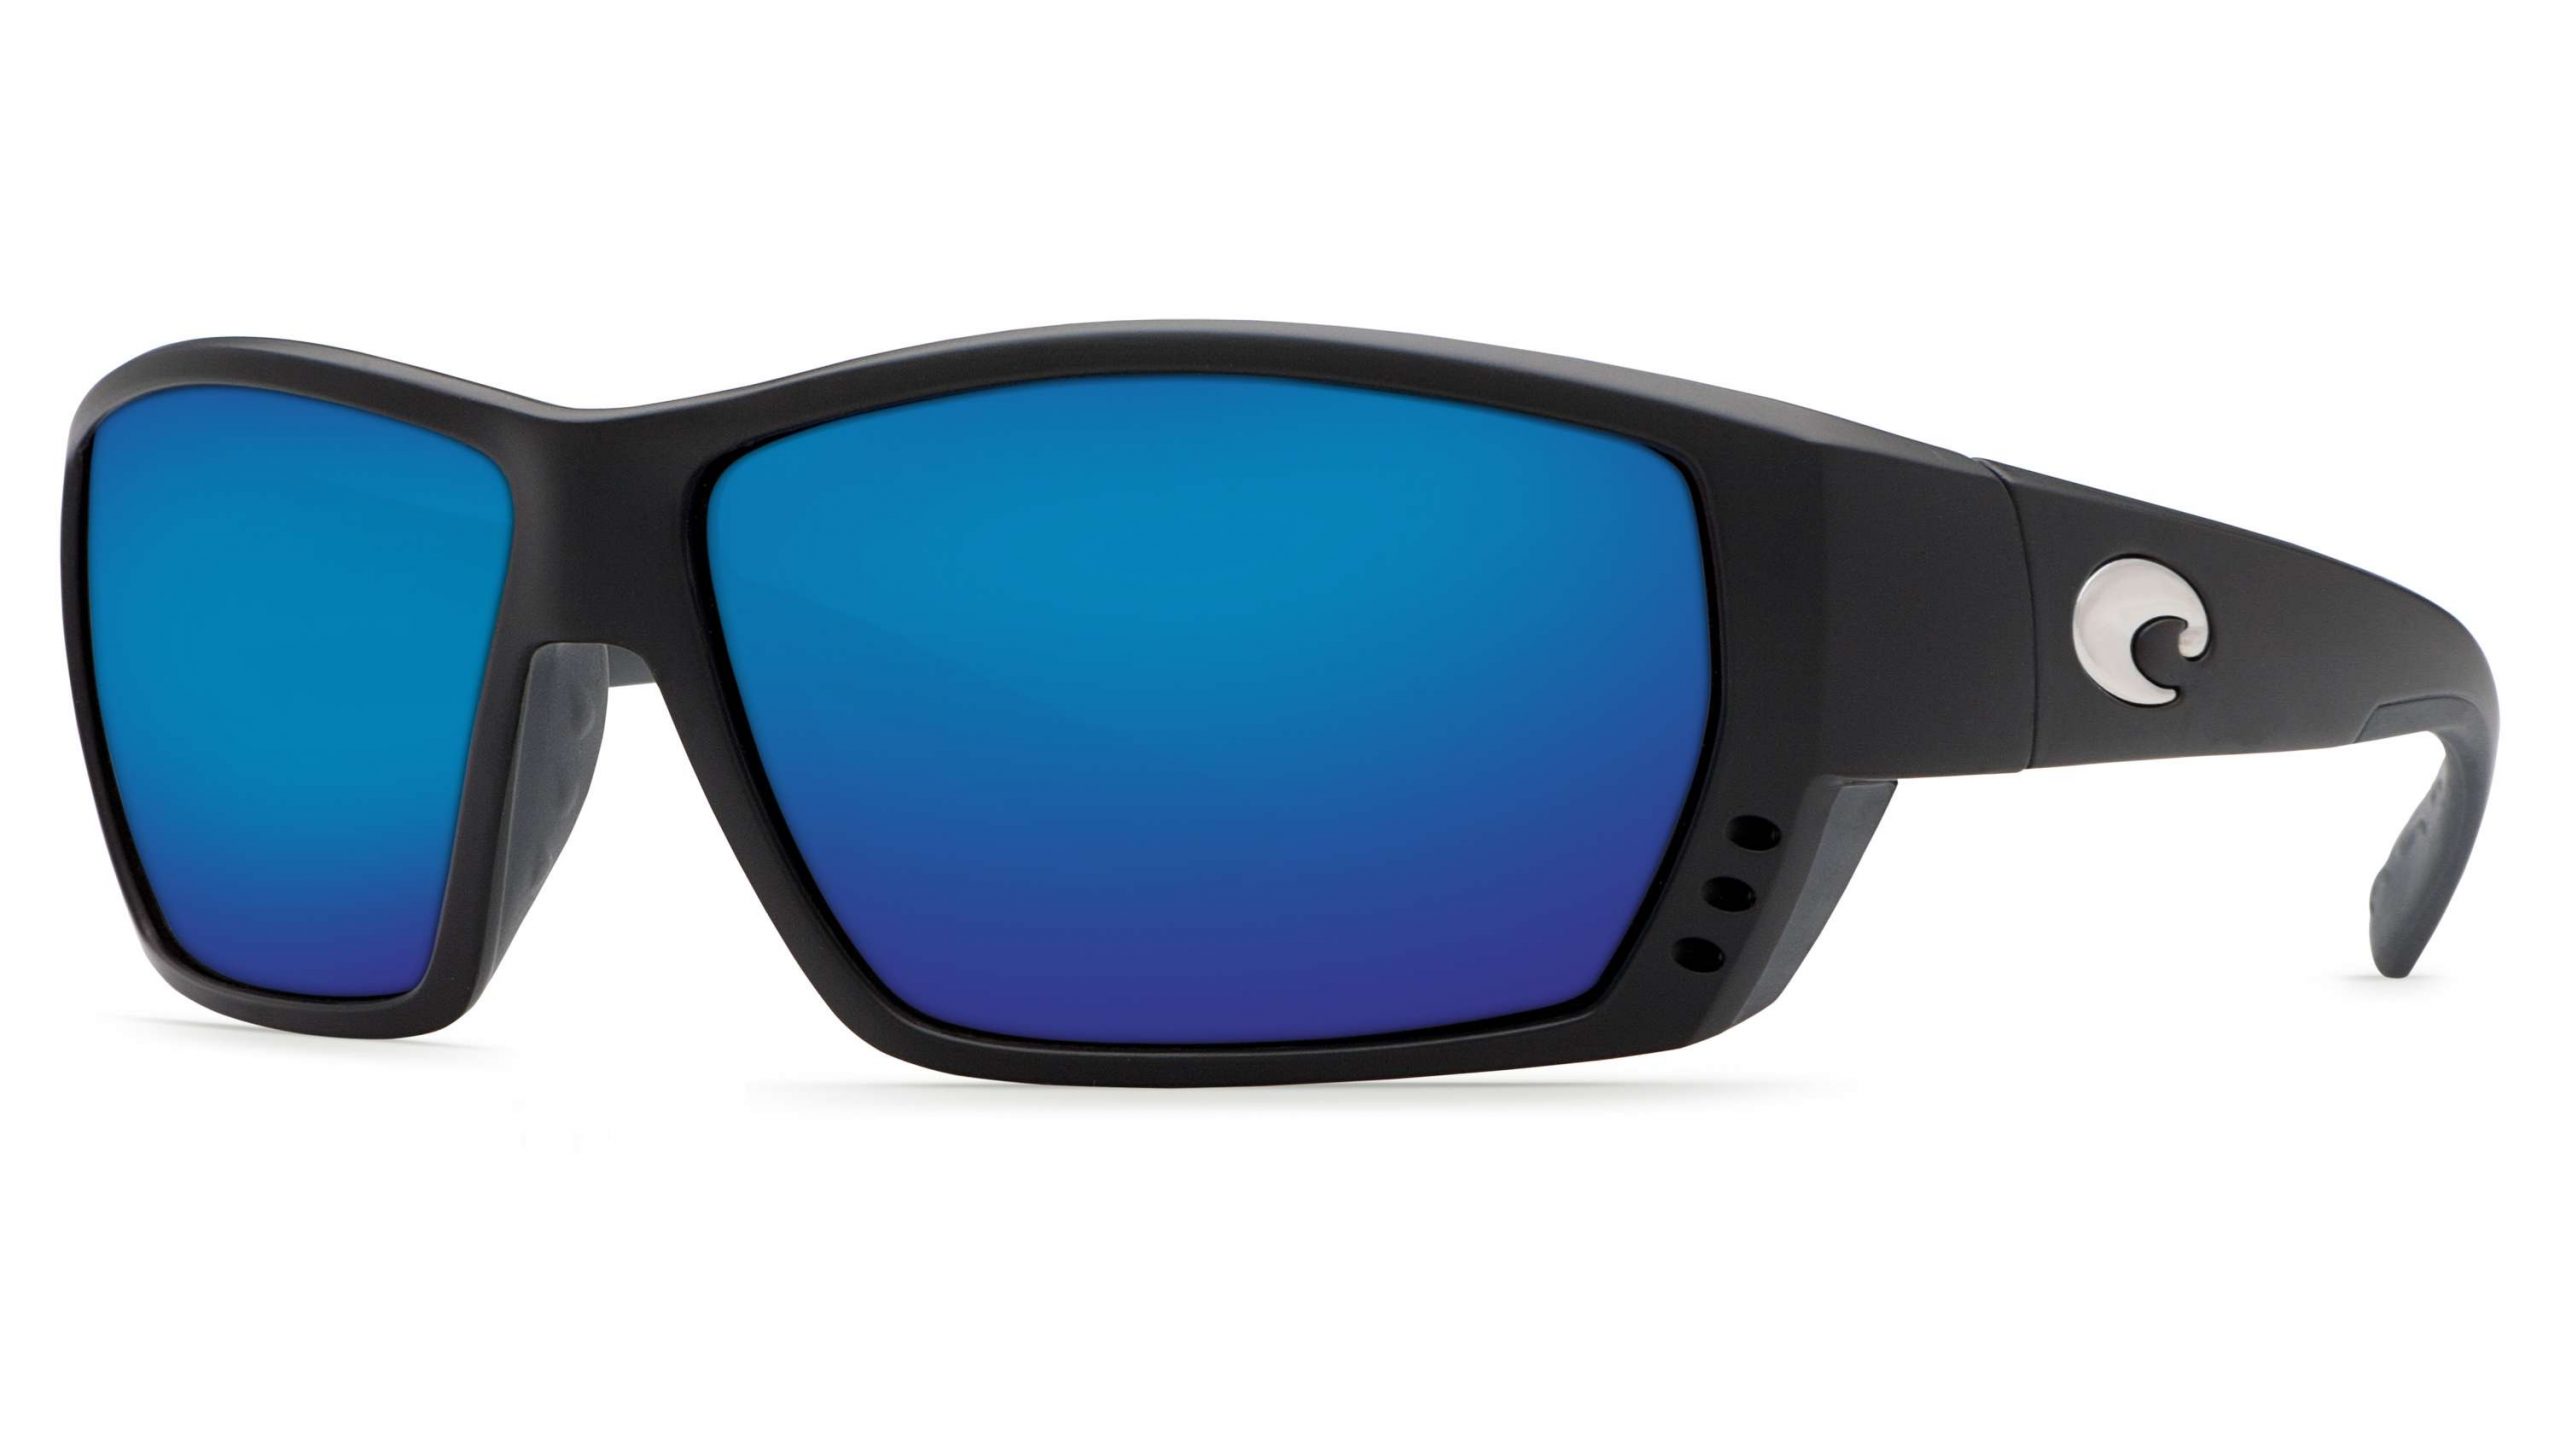 <b>Costa</b><br>	C-MATES<br>				Costa C-MATES sunglass readers are available with Costa's 580 lens technology. Many new styles are available for 2015, and Costa has added a third power range of +2.00 that fits in nicely between the +1.50 and the +2.50. Costaâs 580 lens technology selectively filters out harsh yellow and harmful high-energy ultraviolet blue light. Costa C-MATES are available in nine styles and lens color choices include gray, copper or blue mirror.